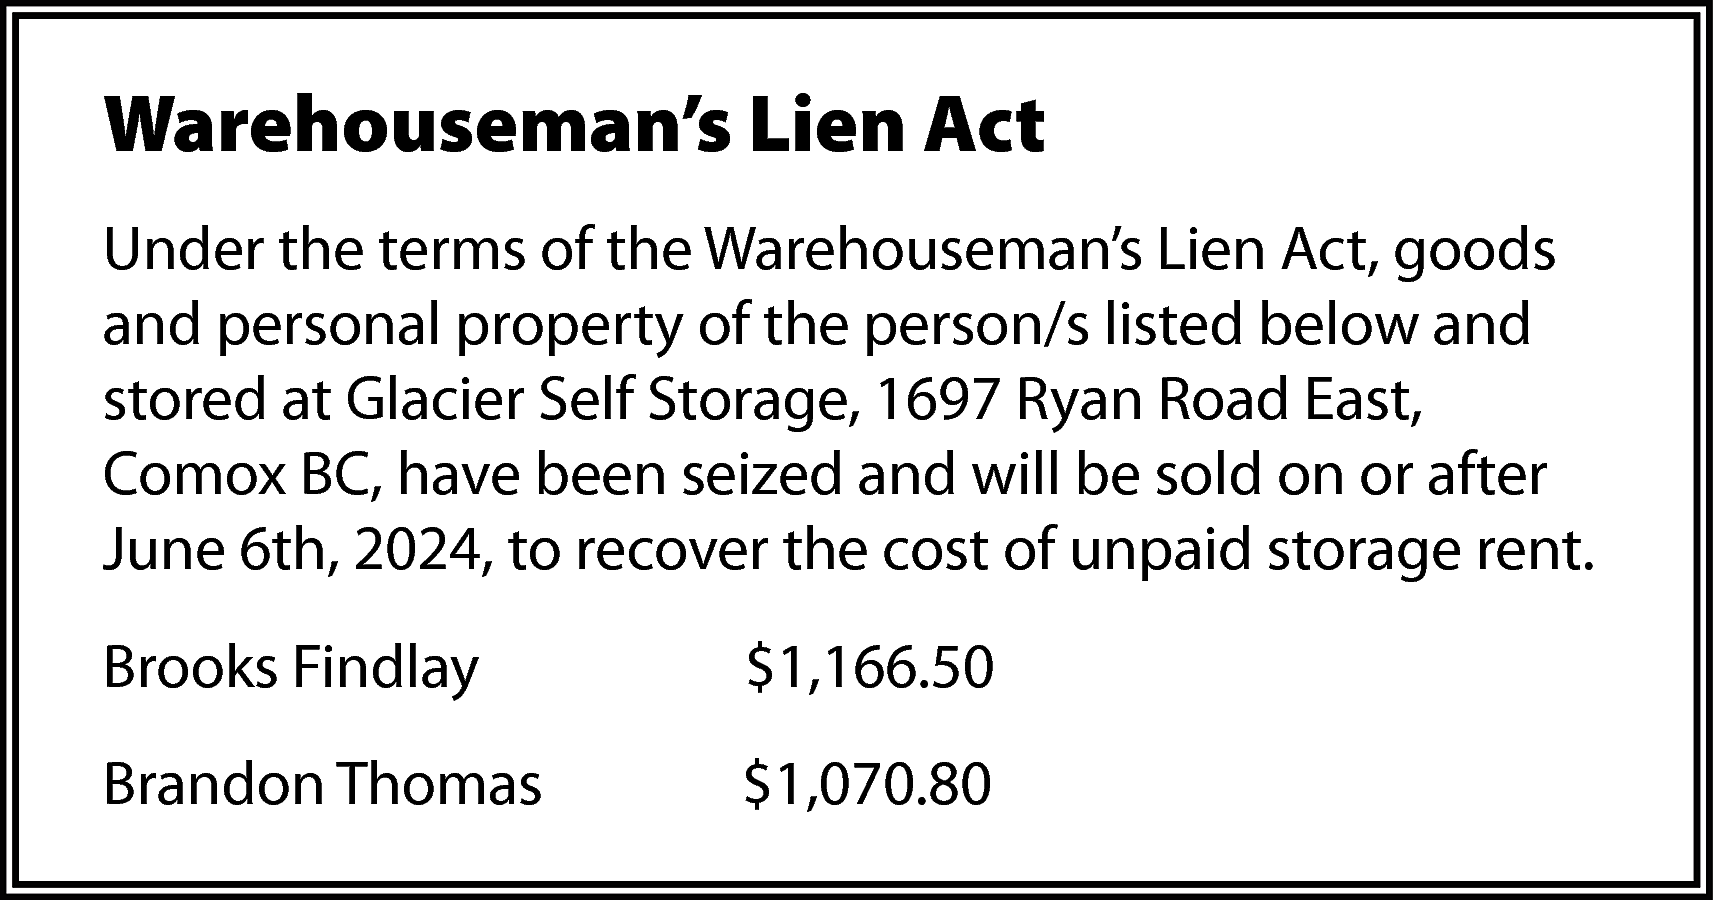 Warehouseman’s Lien Act <br>Under the  Warehouseman’s Lien Act  Under the terms of the Warehouseman’s Lien Act, goods  and personal property of the person/s listed below and  stored at Glacier Self Storage, 1697 Ryan Road East,  Comox BC, have been seized and will be sold on or after  June 6th, 2024, to recover the cost of unpaid storage rent.  Brooks Findlay    $1,166.50    Brandon Thomas    $1,070.80    